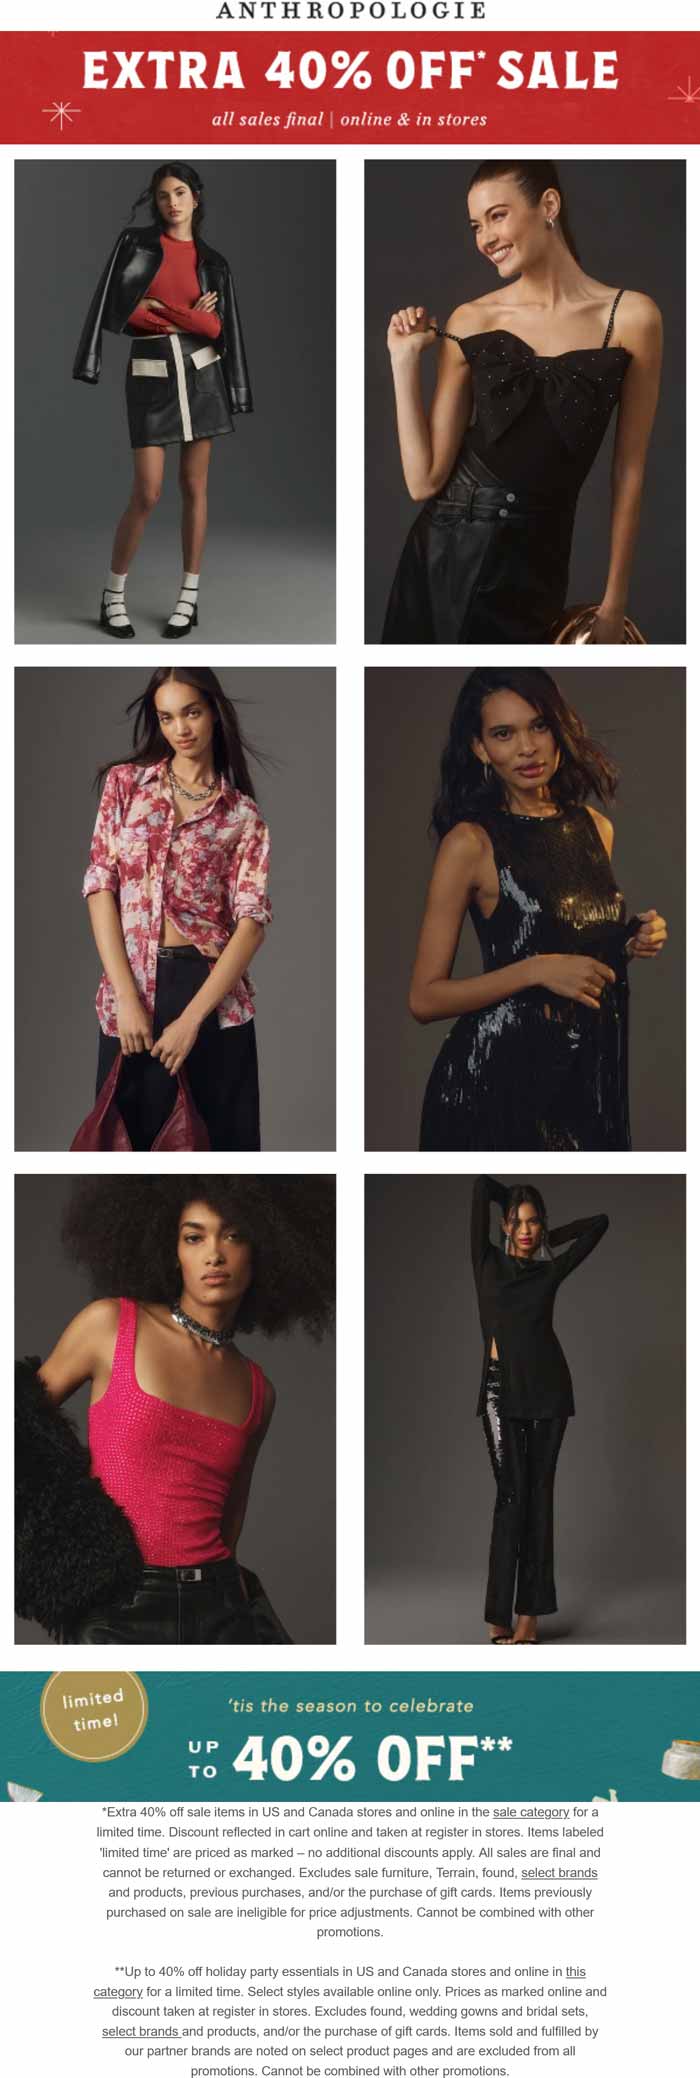 Extra 40% off sale items at Anthropologie, ditto online #anthropologie